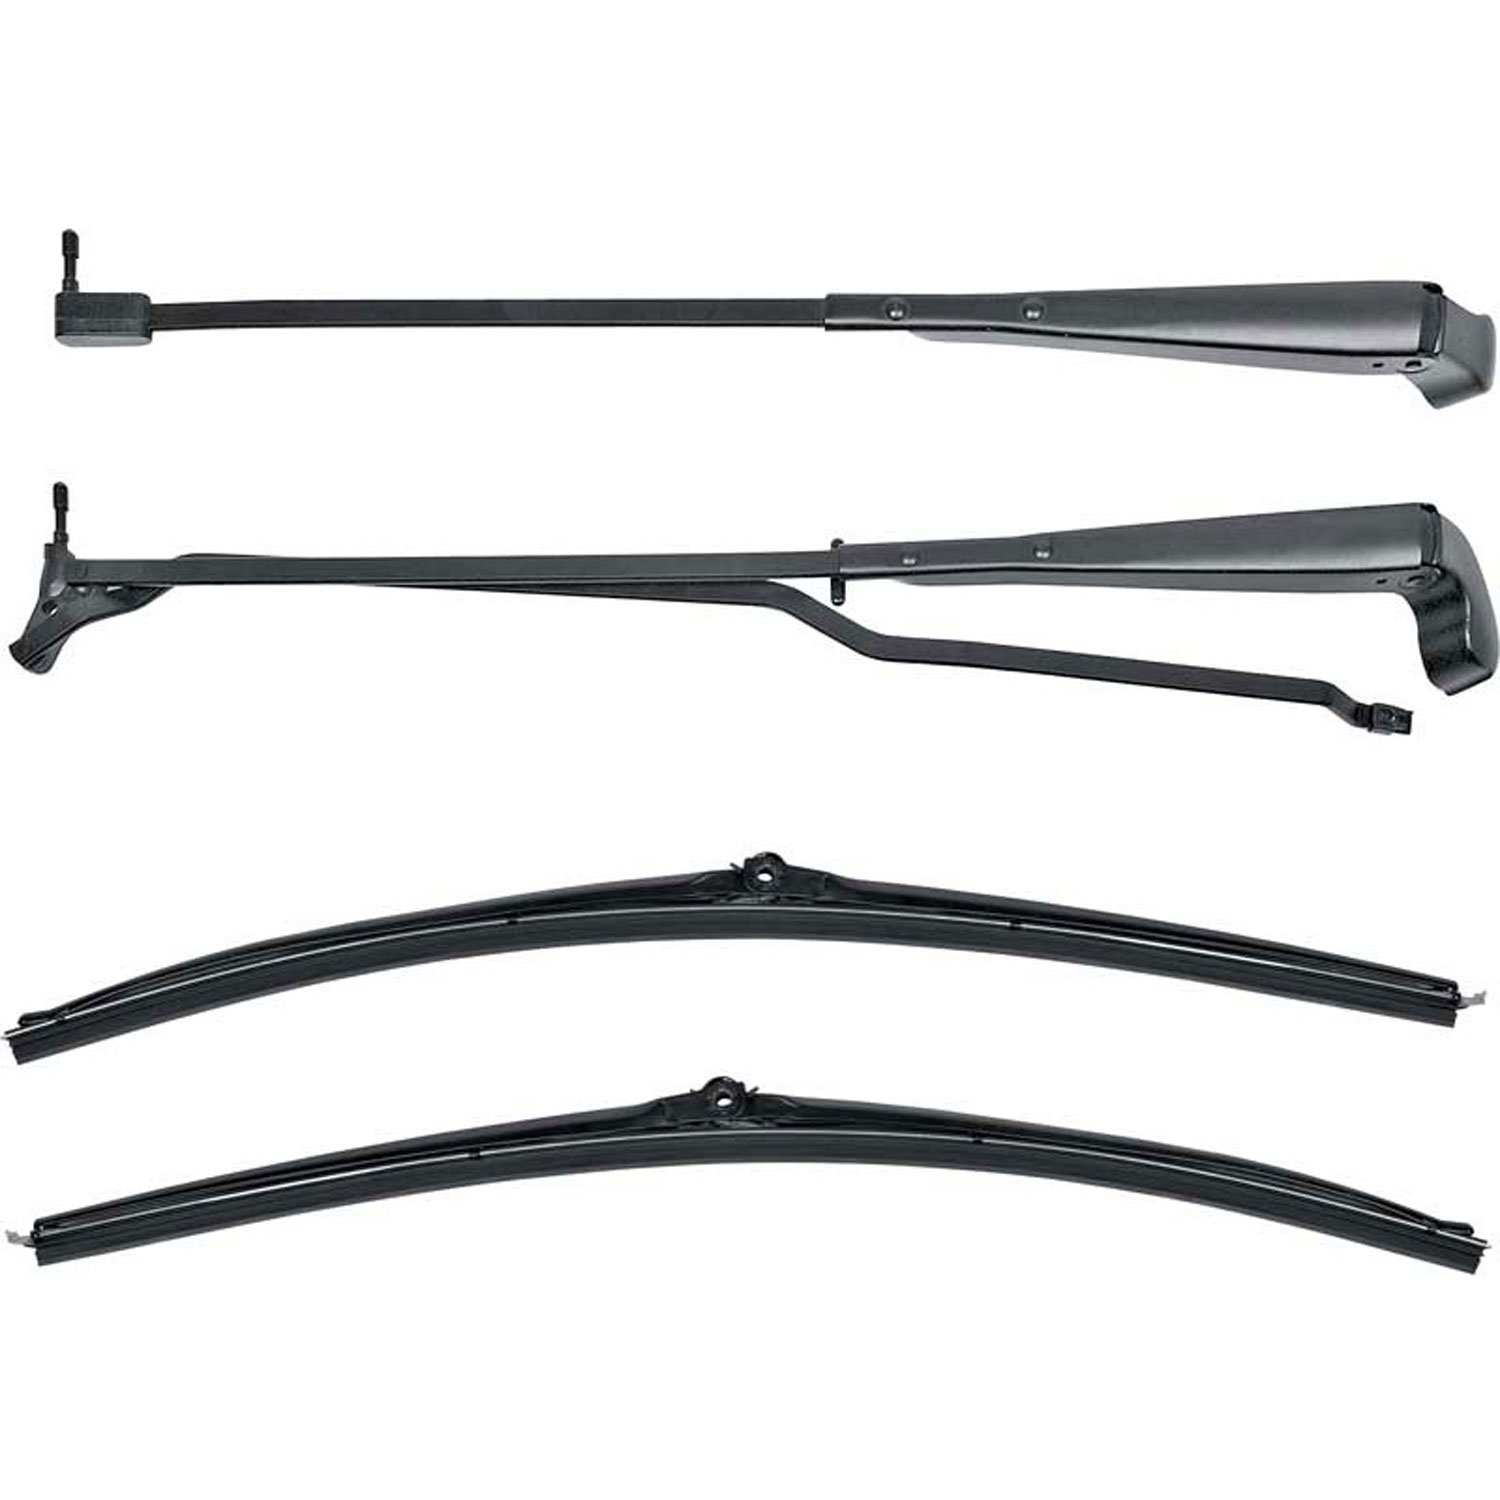 Recessed Windshield Wiper Arm and Blade Set 1970-1981